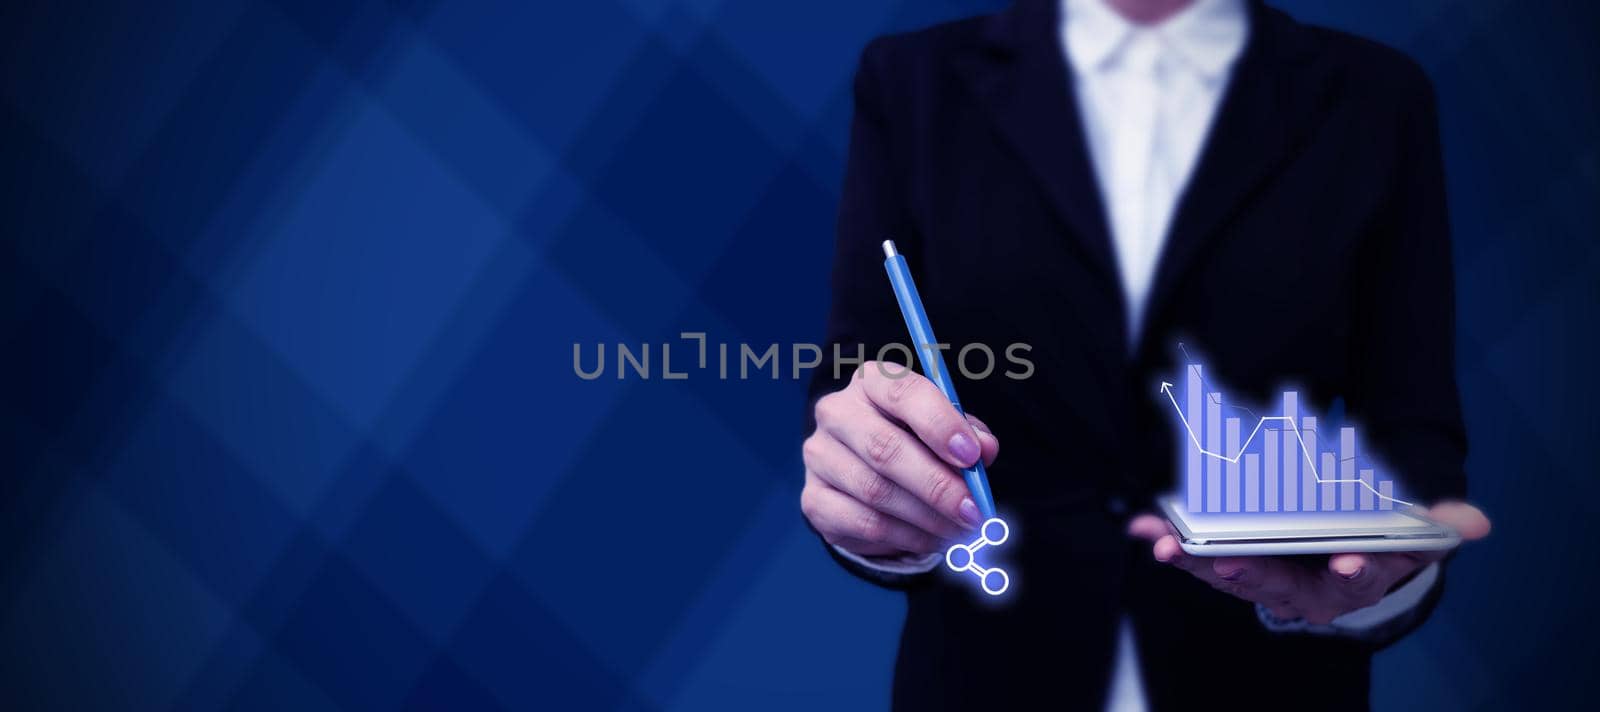 Lady in suit holding pen symbolizing successful teamwork accomplishing newest project plans. Woman carrying ballpoint pencil representing combined effort management. by nialowwa